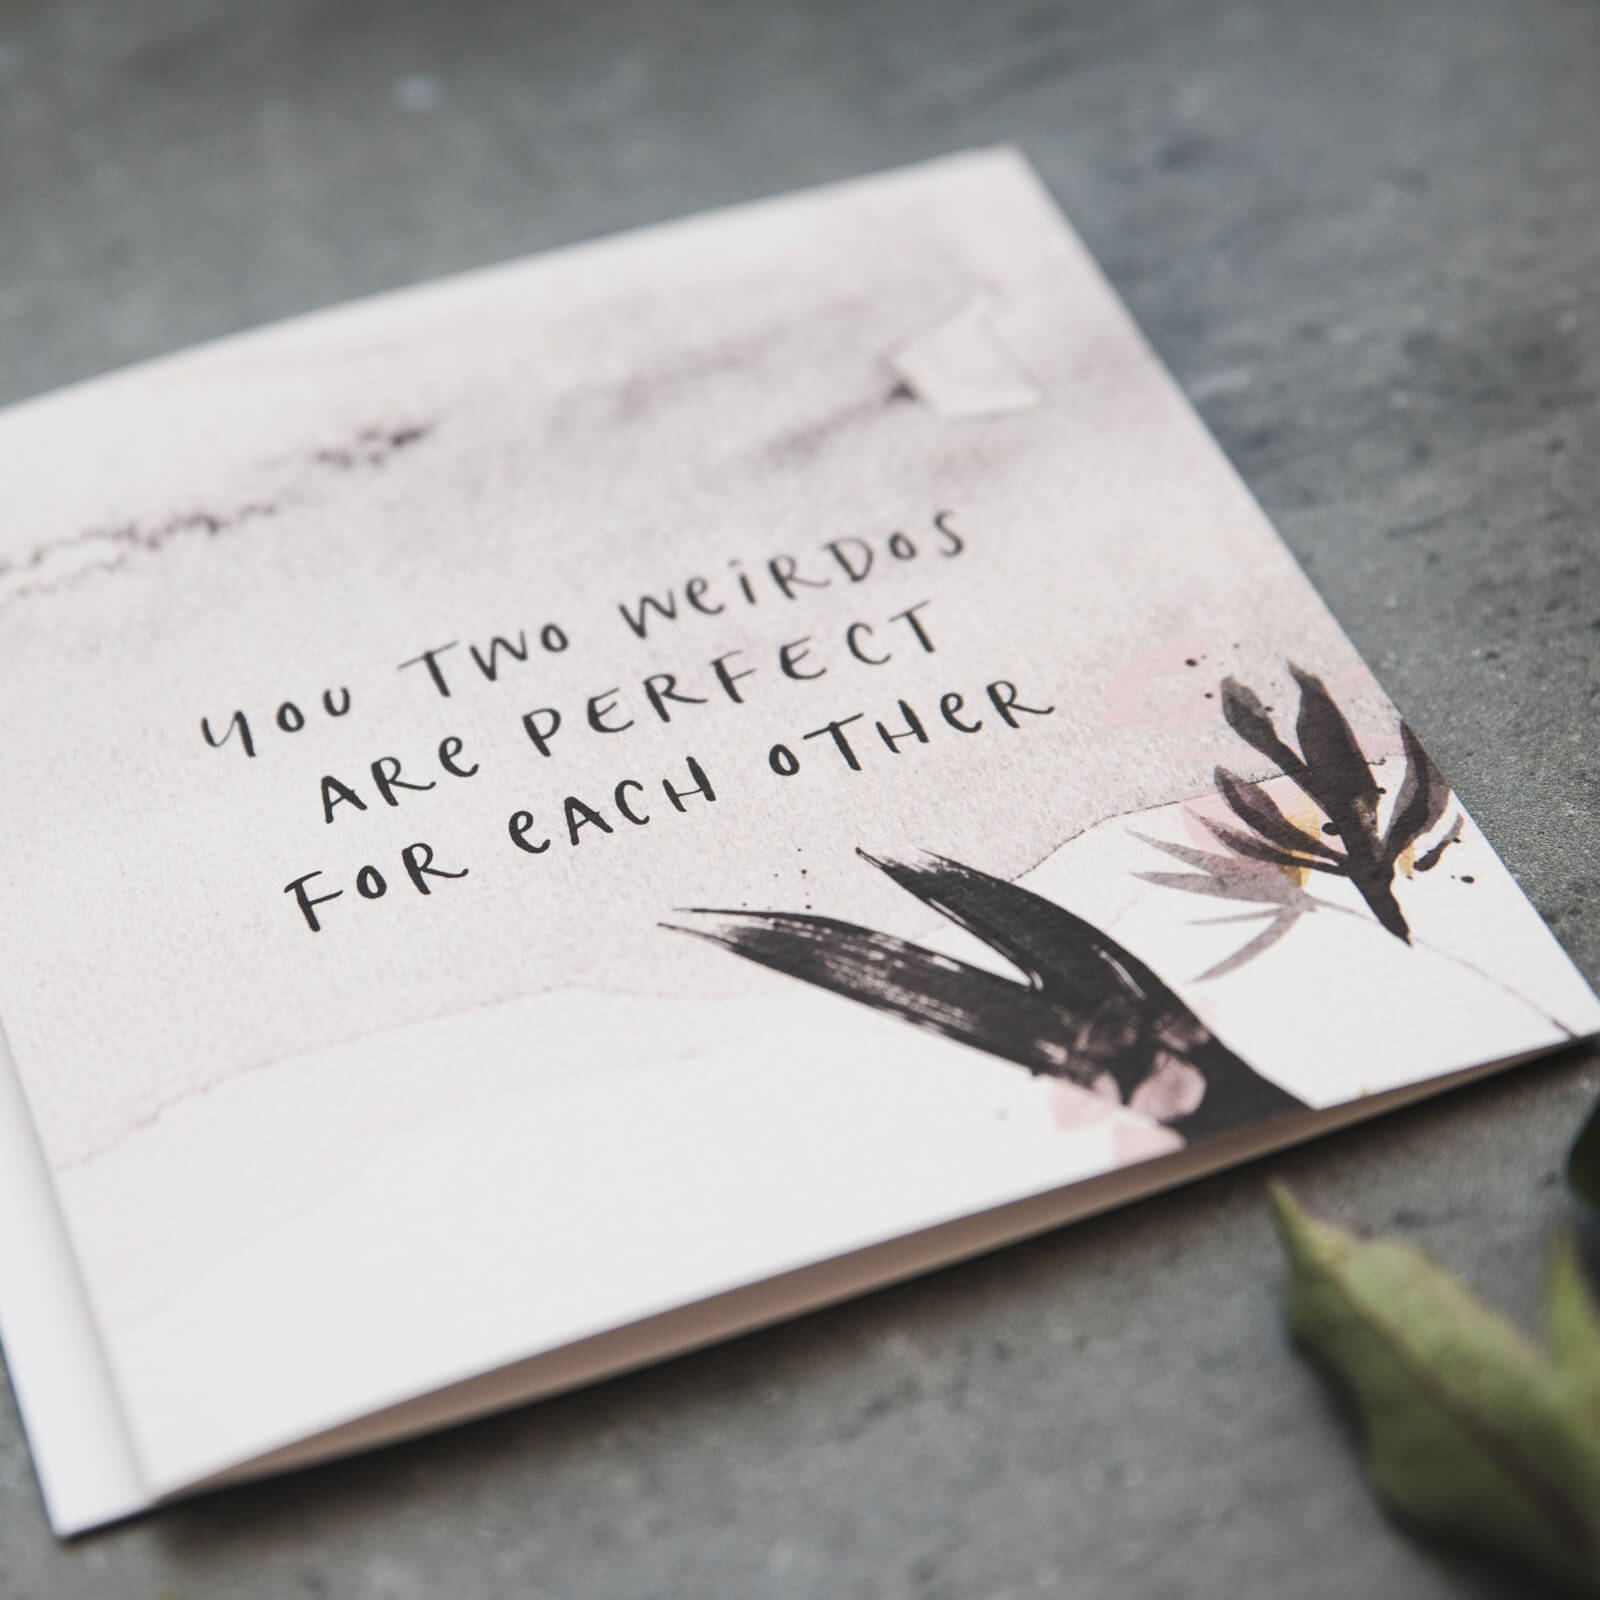 &#39;Perfect For Each Other&#39; Funny Engagement And Wedding Card - I am Nat Ltd - Greeting Card